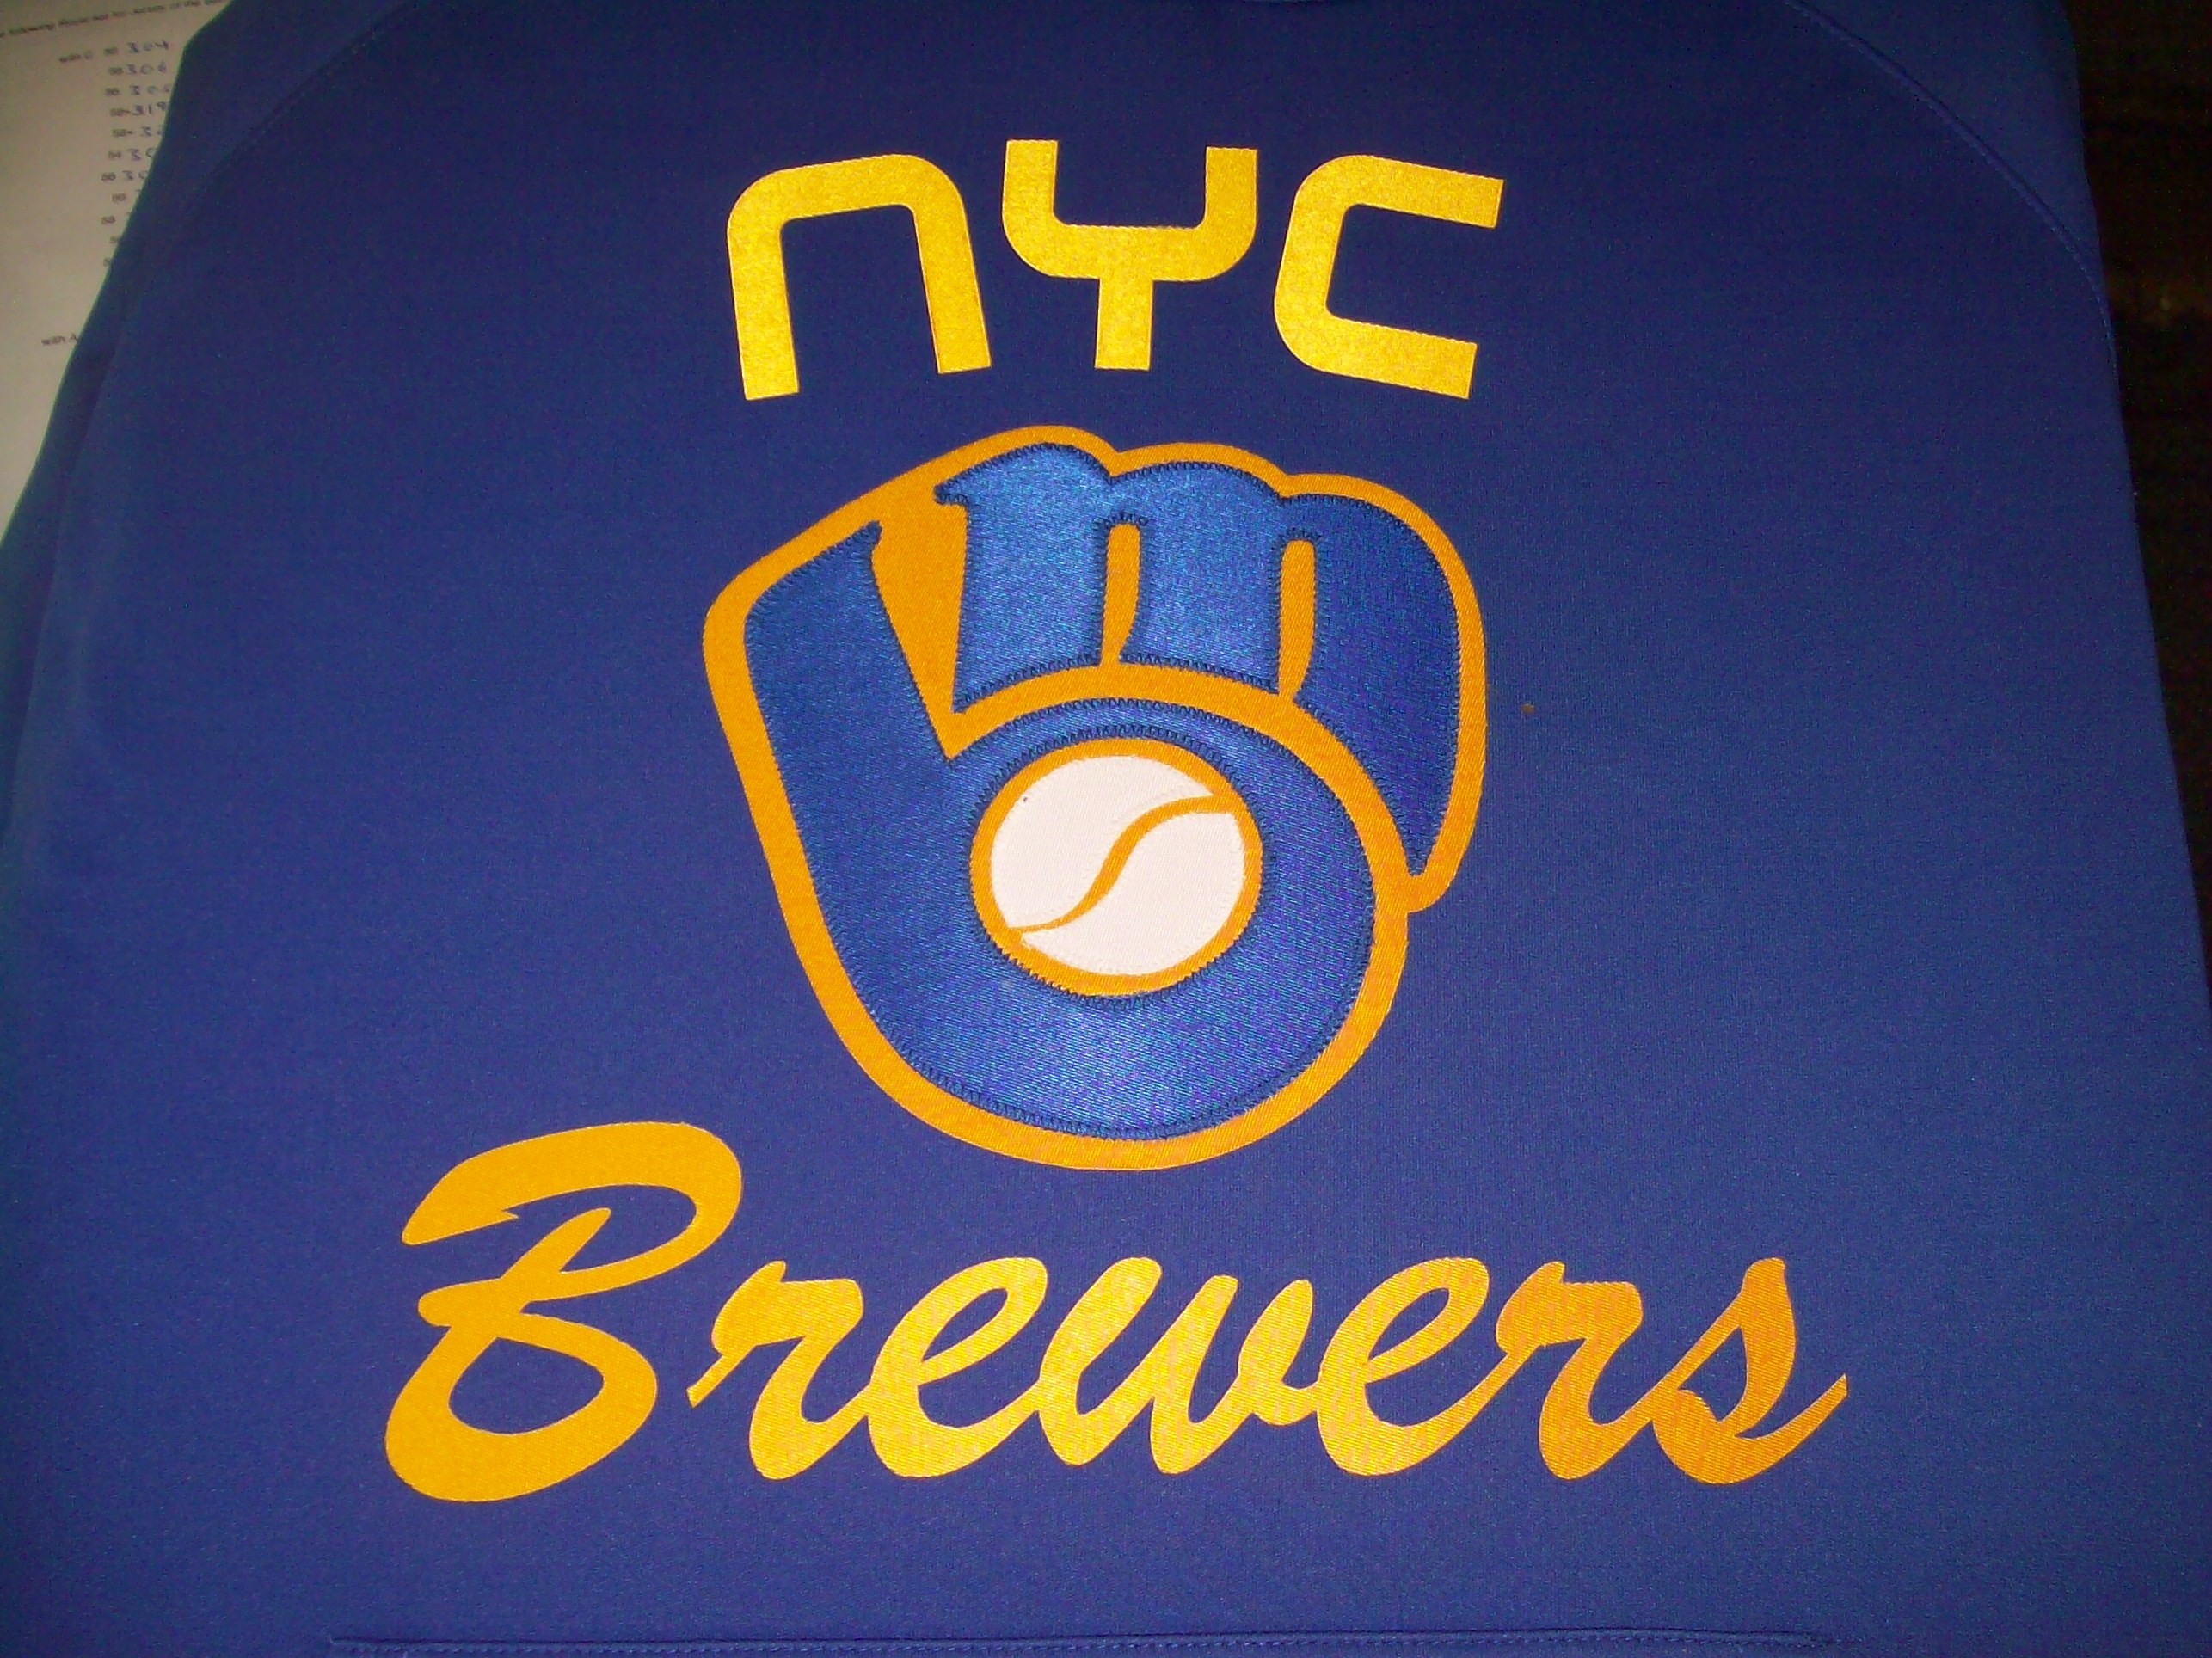 NYC_Brewers